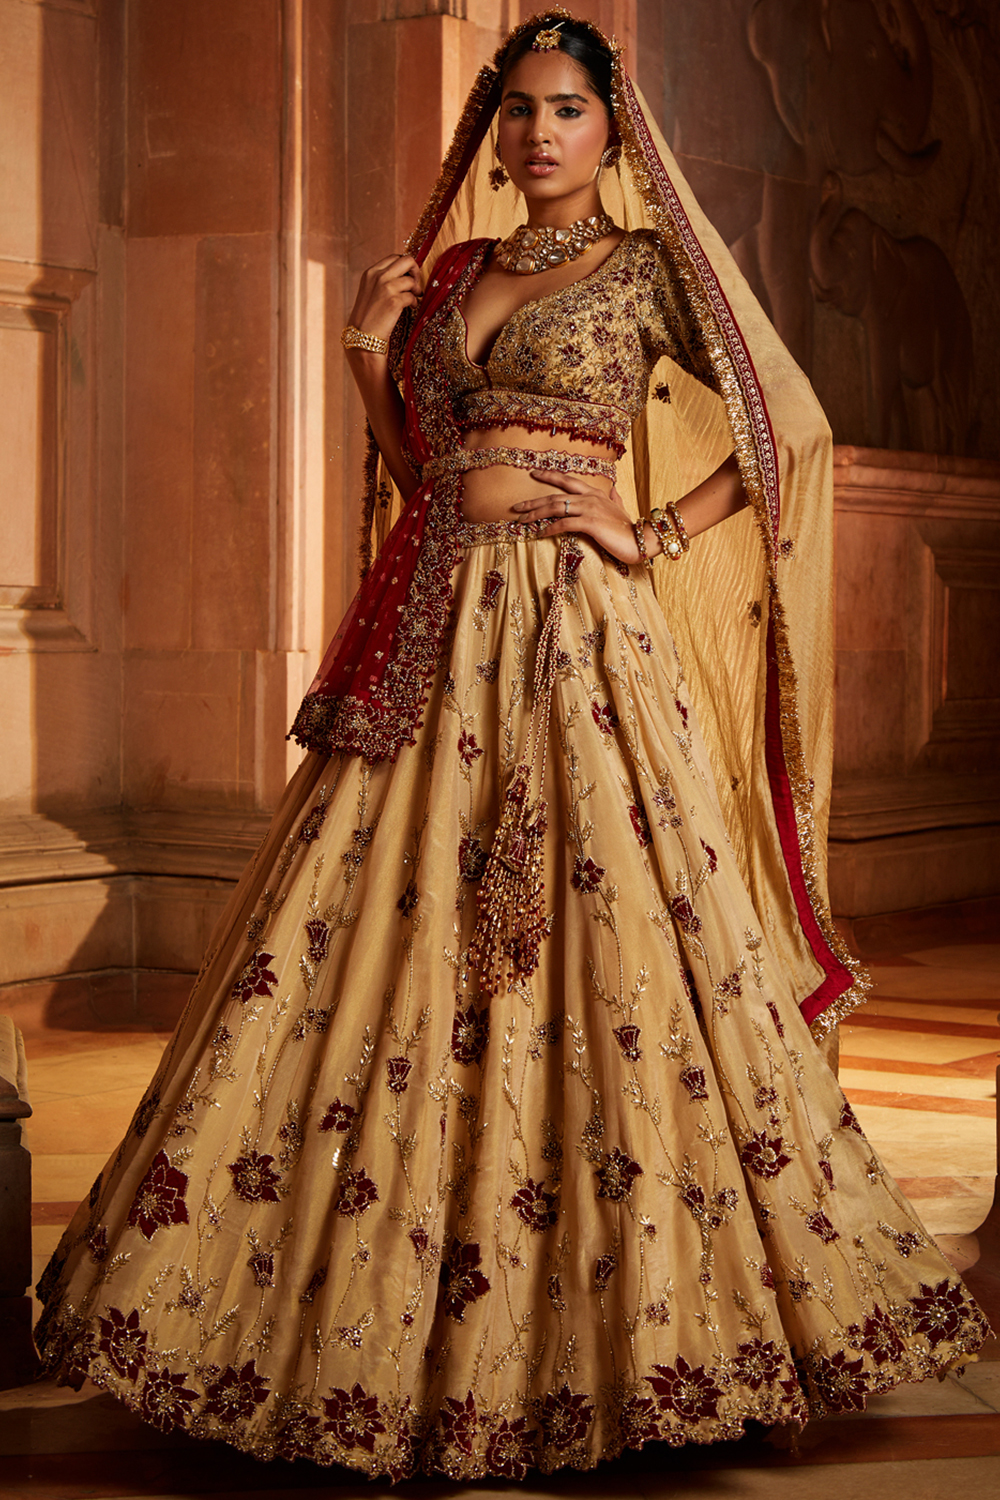 Gold Tissue Lehenga Choli And Belt With Cotrasting Red Tulle Dupatta And Optional Gold Tissue Second Dupatta